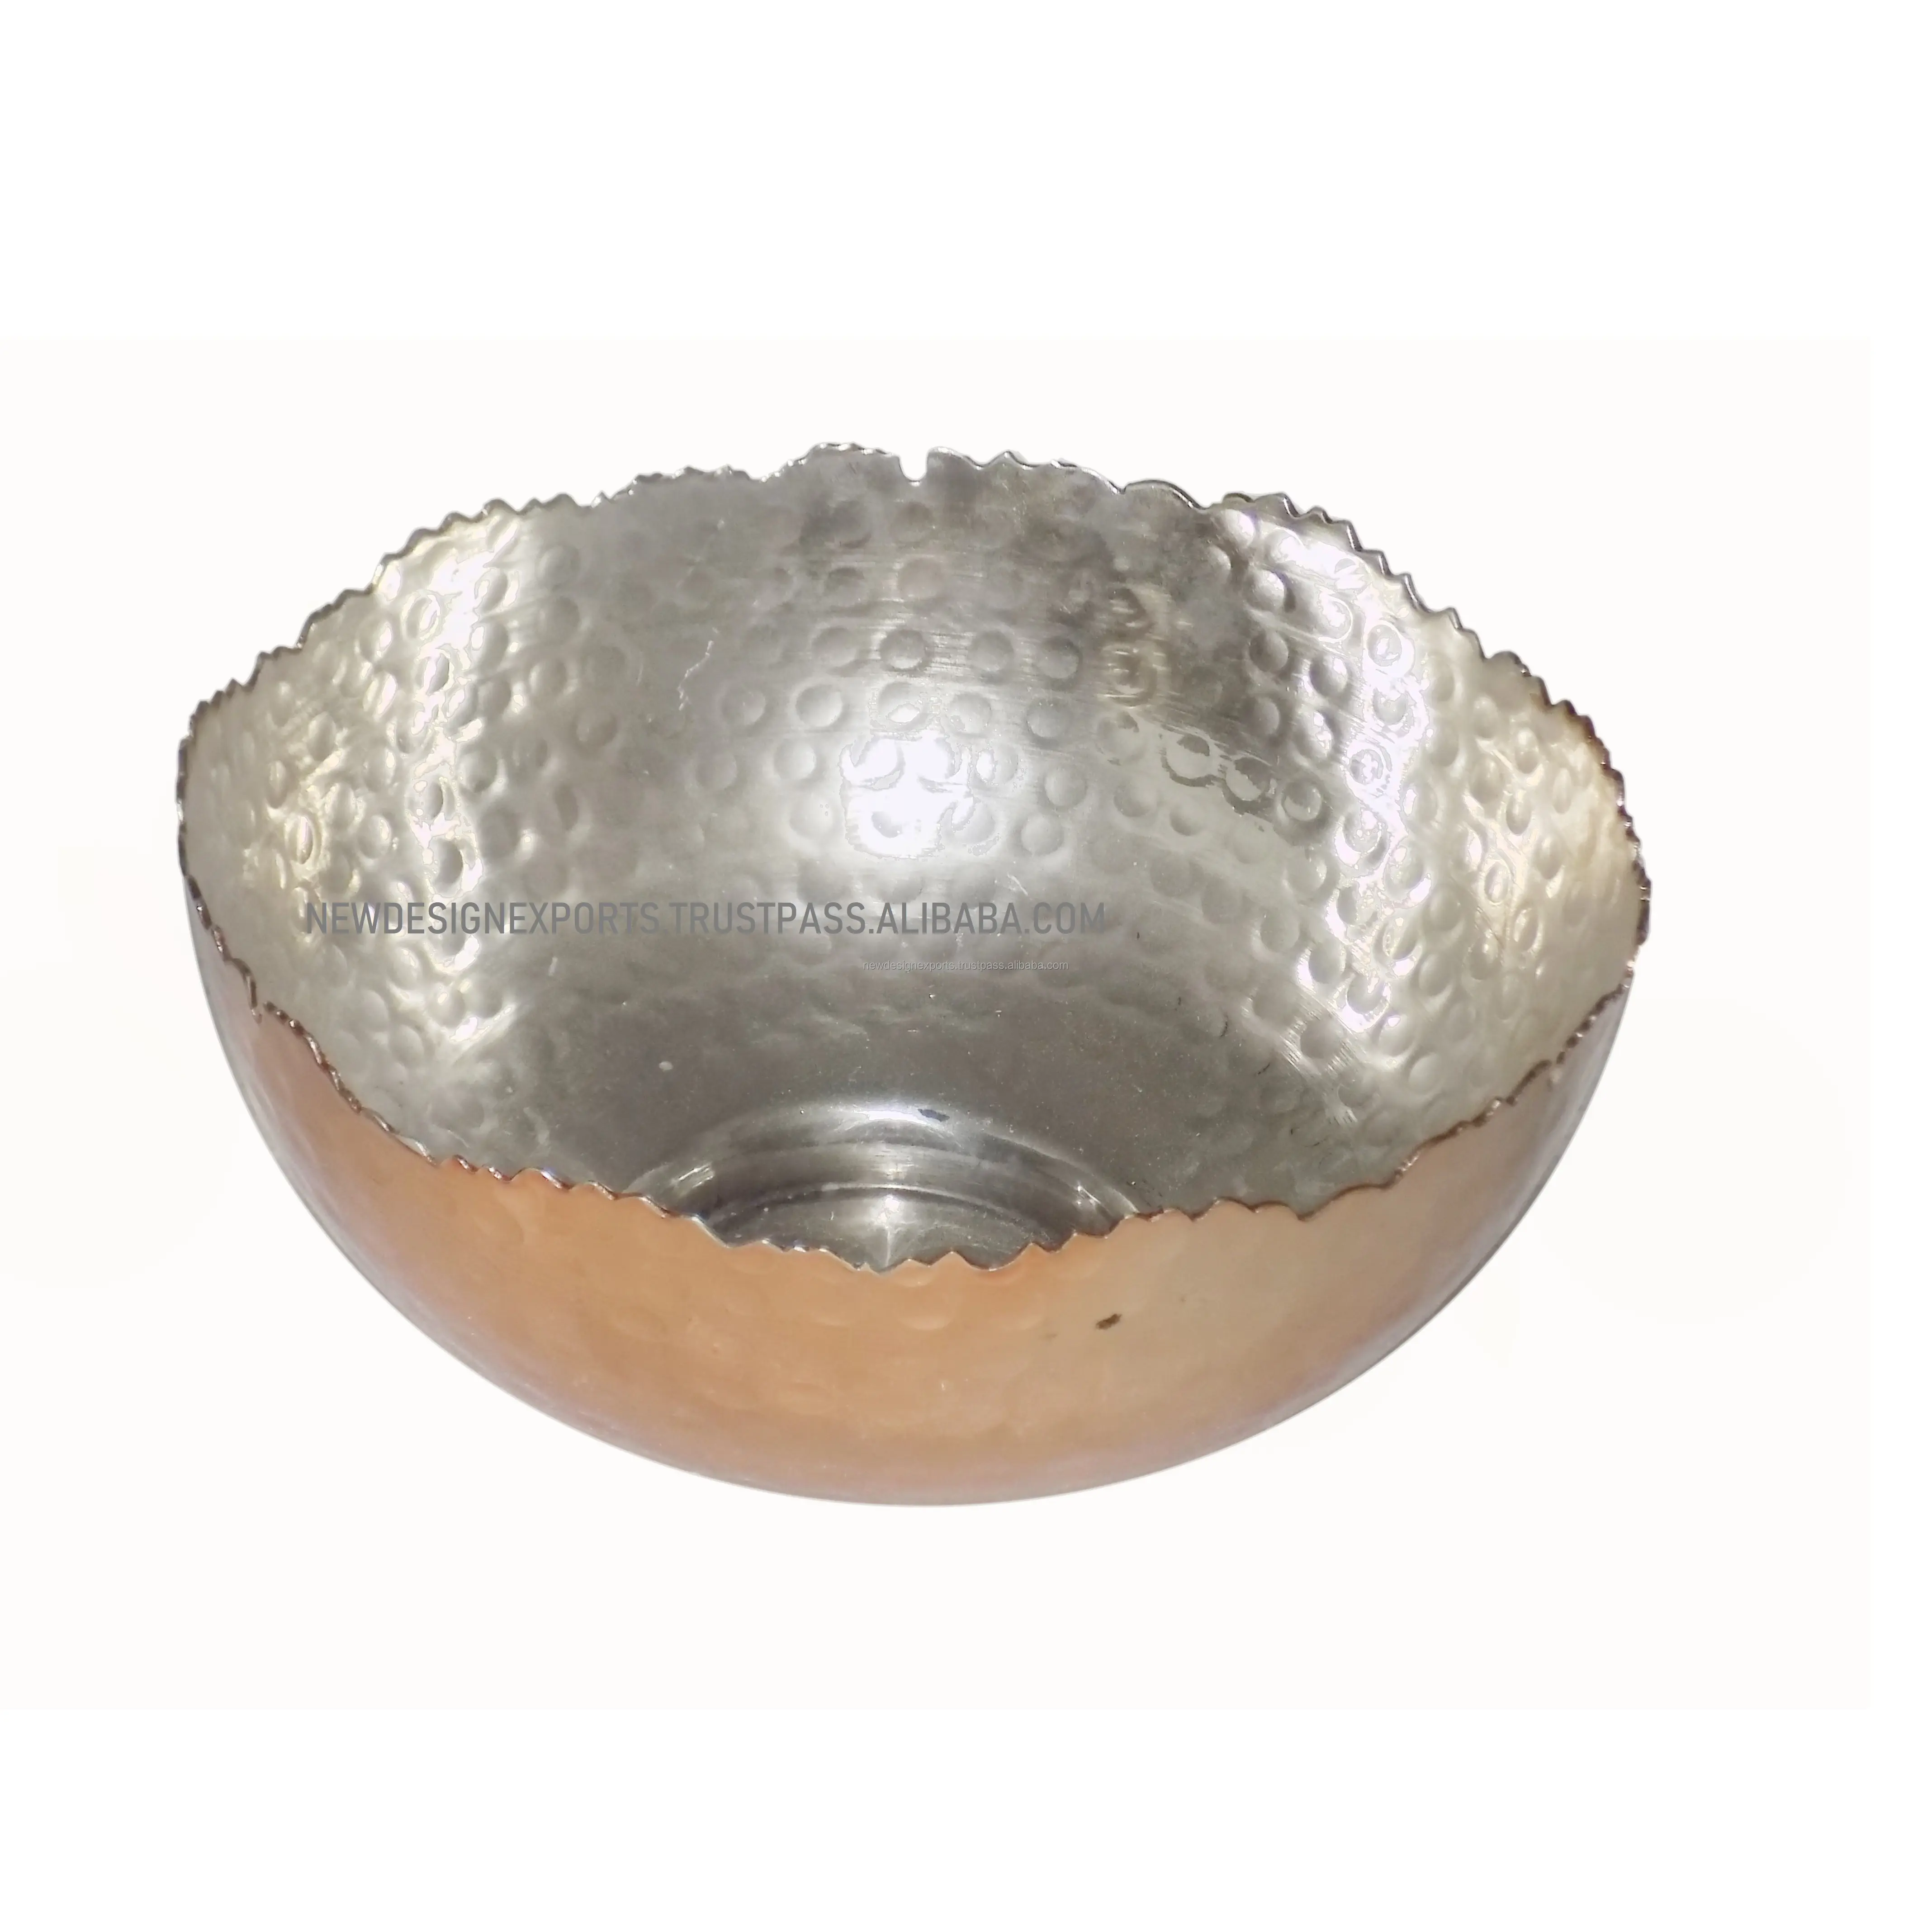 EXCLUSIVE FRUIT BOWL COPPER OUTSIDE SILVER INSIDE